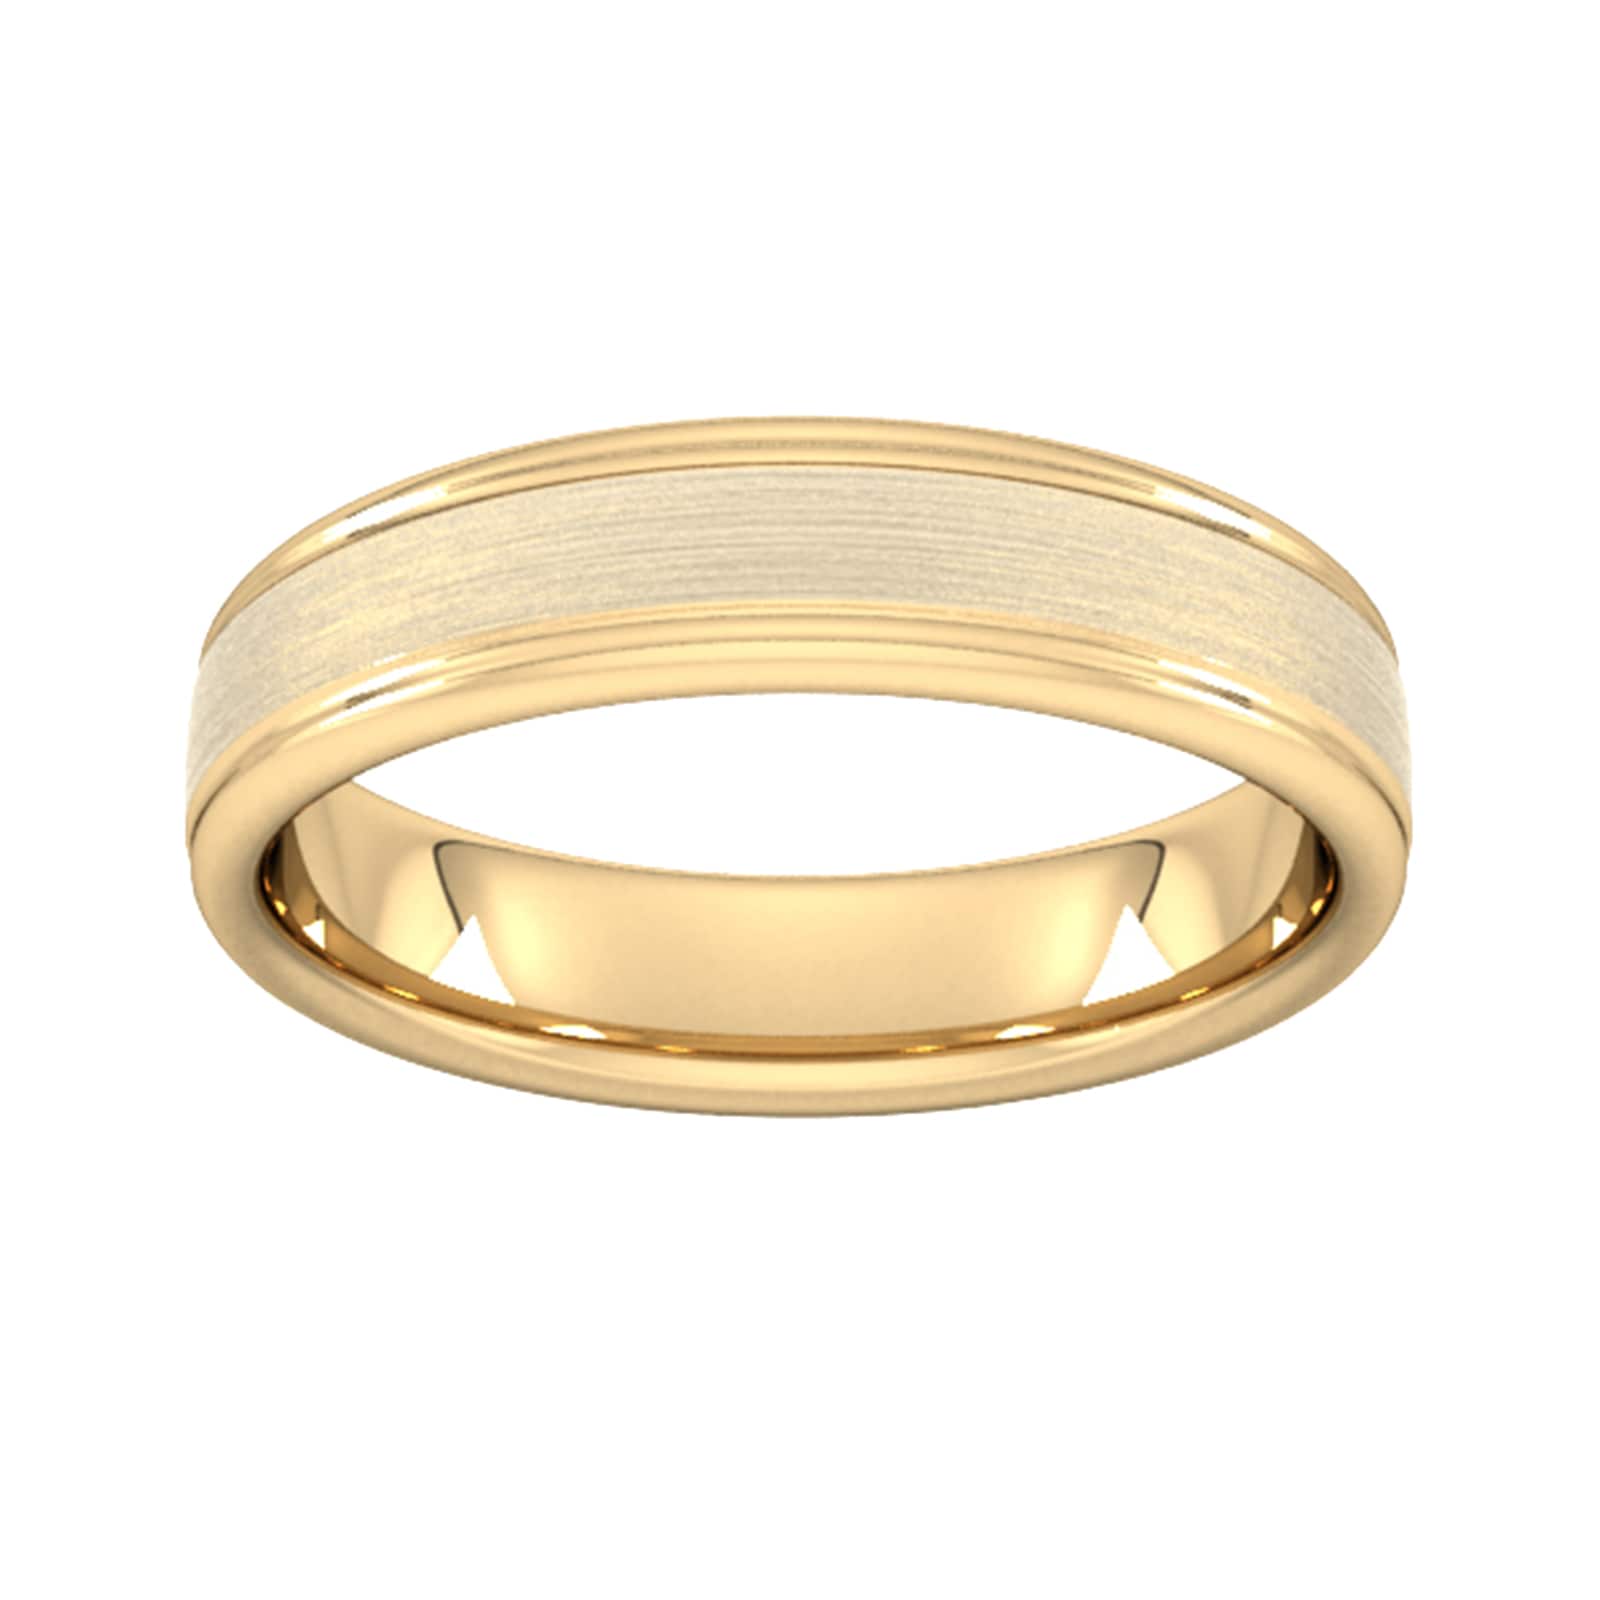 5mm Traditional Court Standard Matt Centre With Grooves Wedding Ring In 18 Carat Yellow Gold - Ring Size H